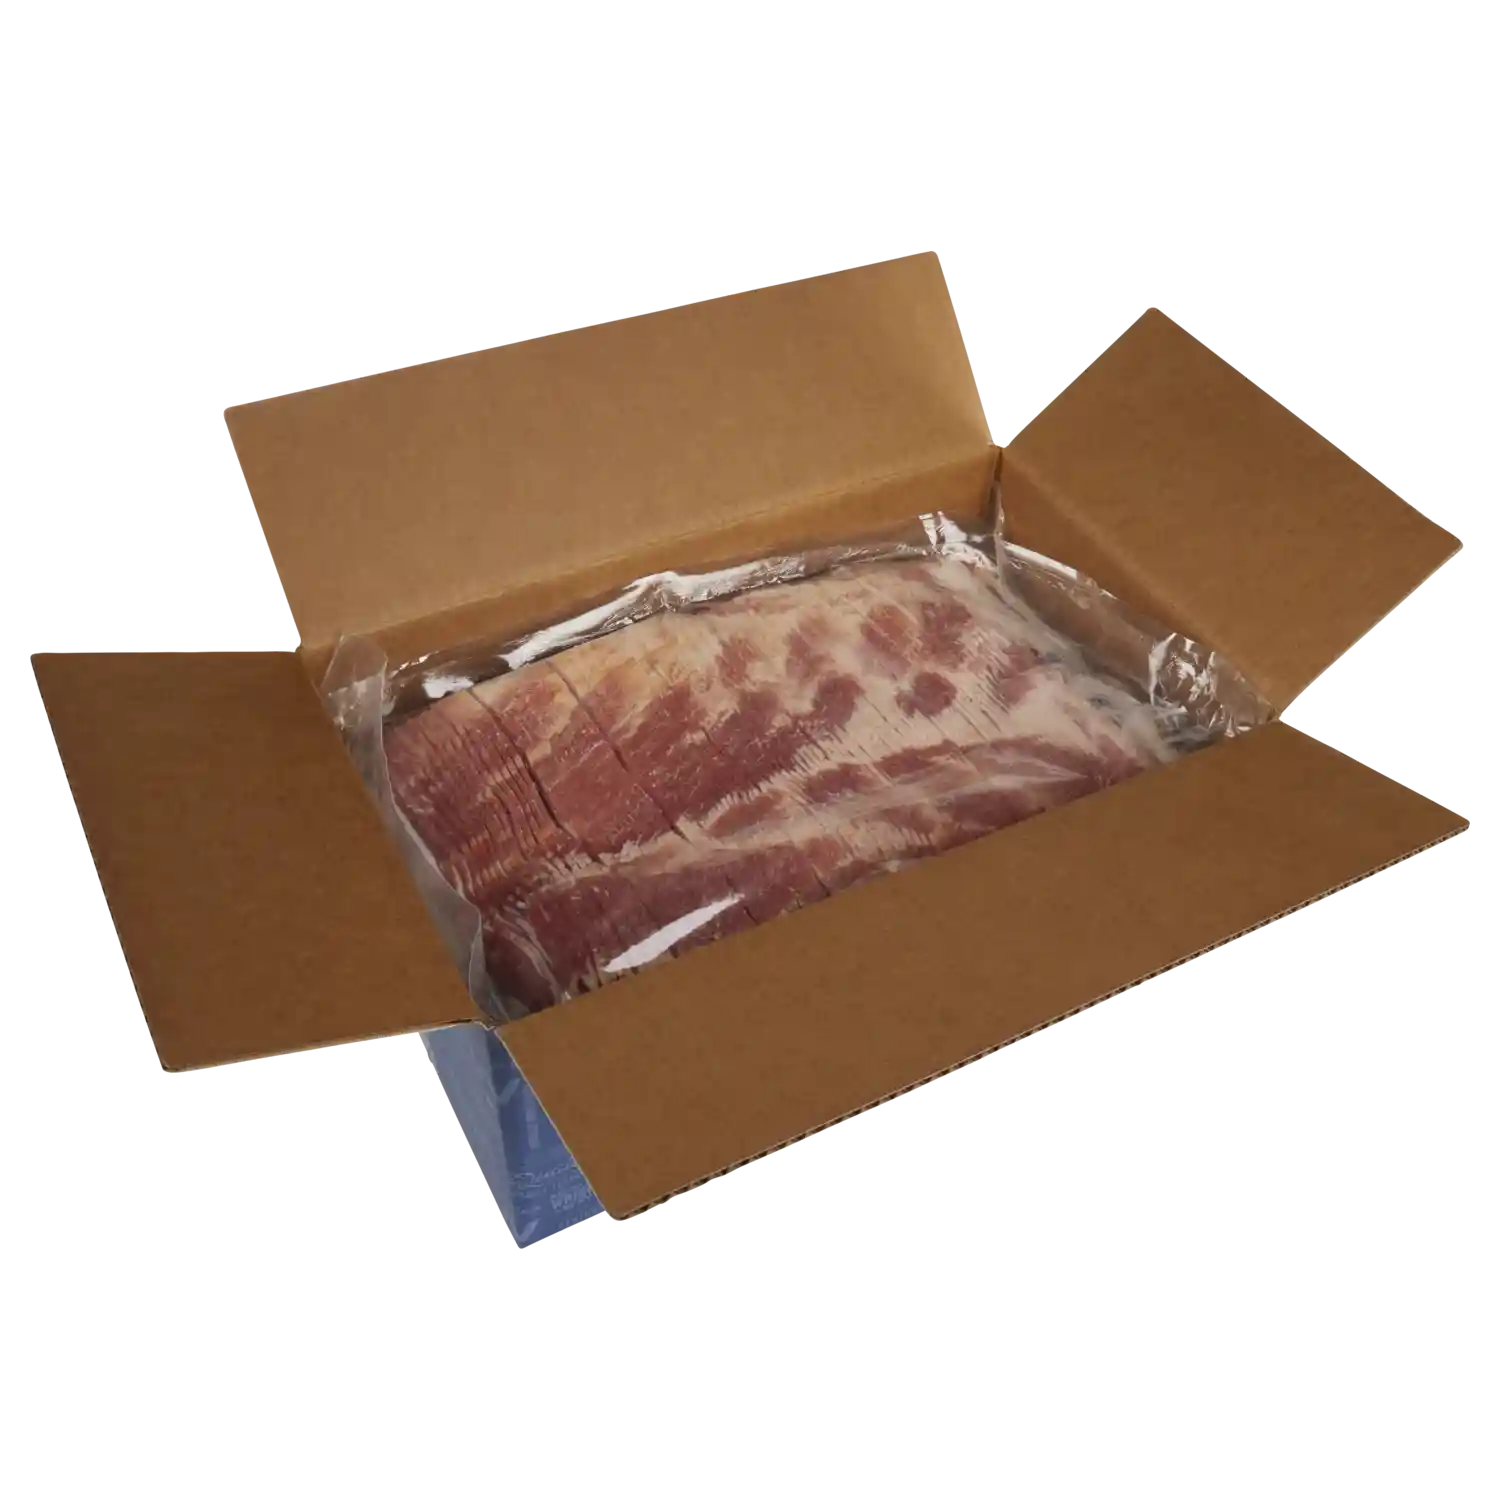 Wright® Brand Naturally Smoked Regular Sliced Bacon, Bulk, 30 Lbs, 14-18 Slices per Pound, Gas Flushed_image_21